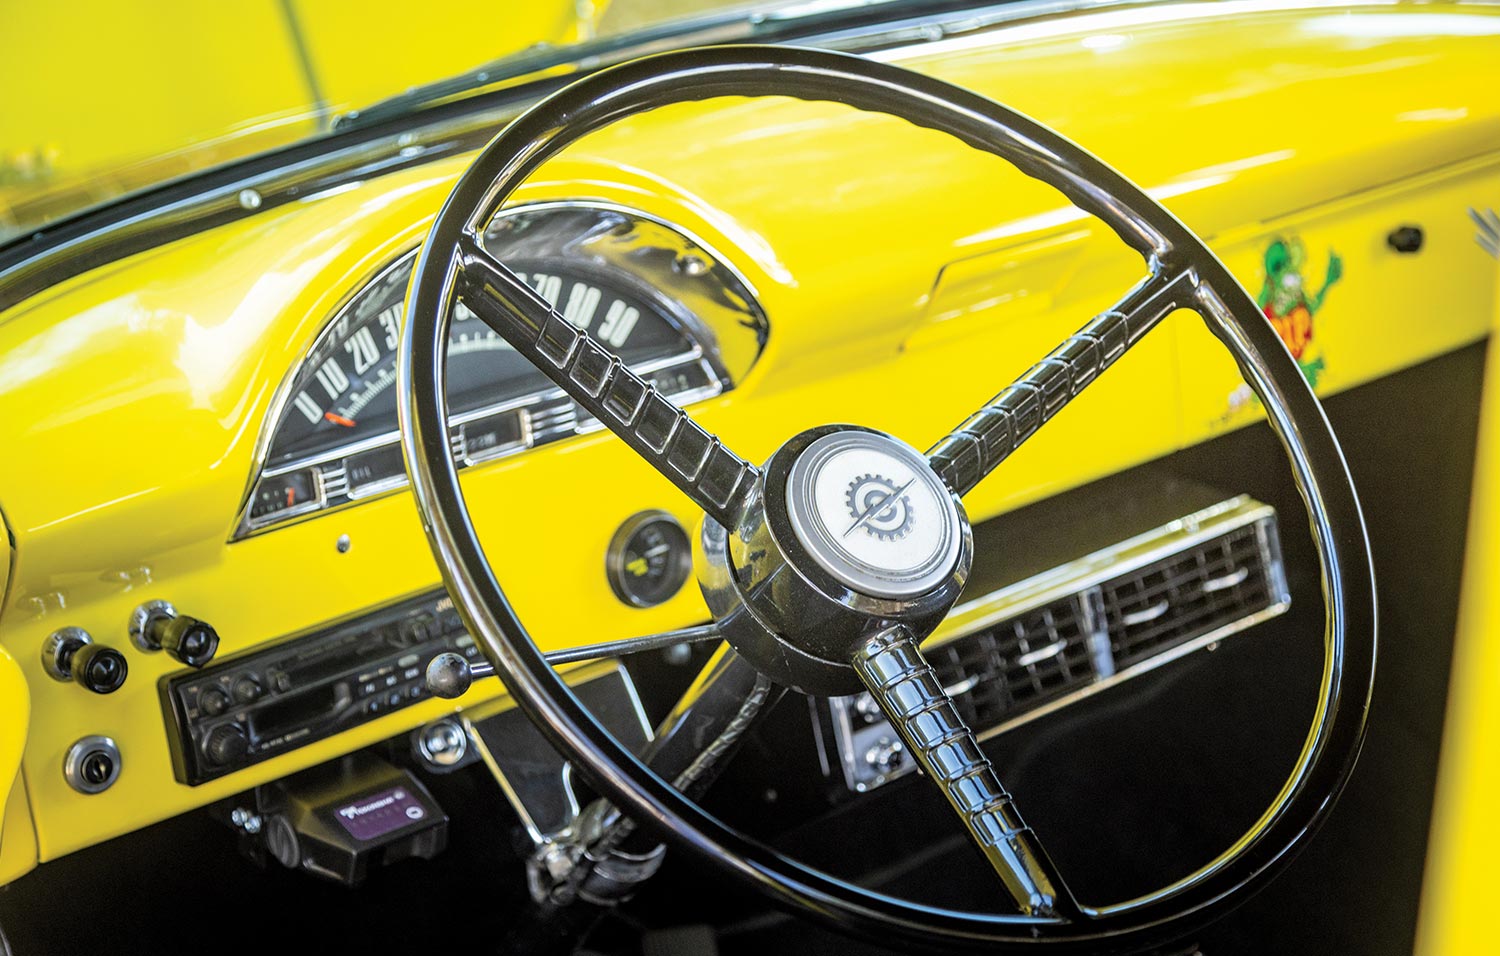 view from outside the driver side window of the classic large steering wheel and dashboard of the ’56 Ford F-100